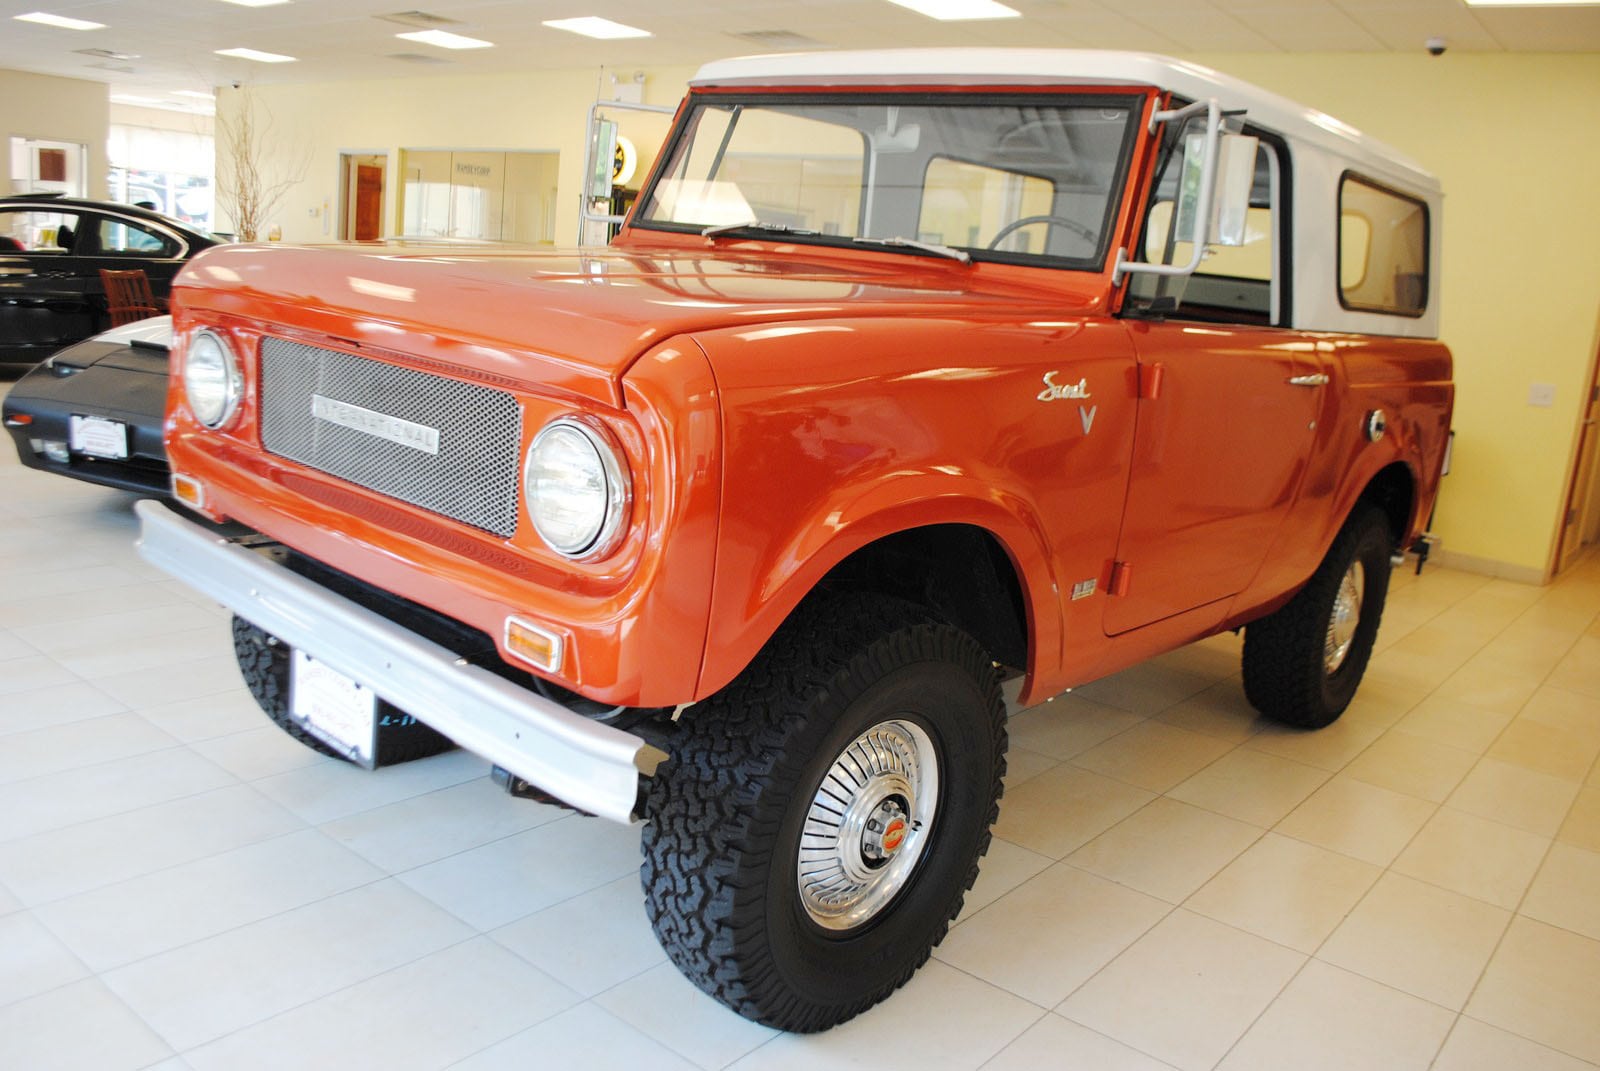 Used 1967 INTERNATIONAL Scout 800 For Sale | West Milford NJ